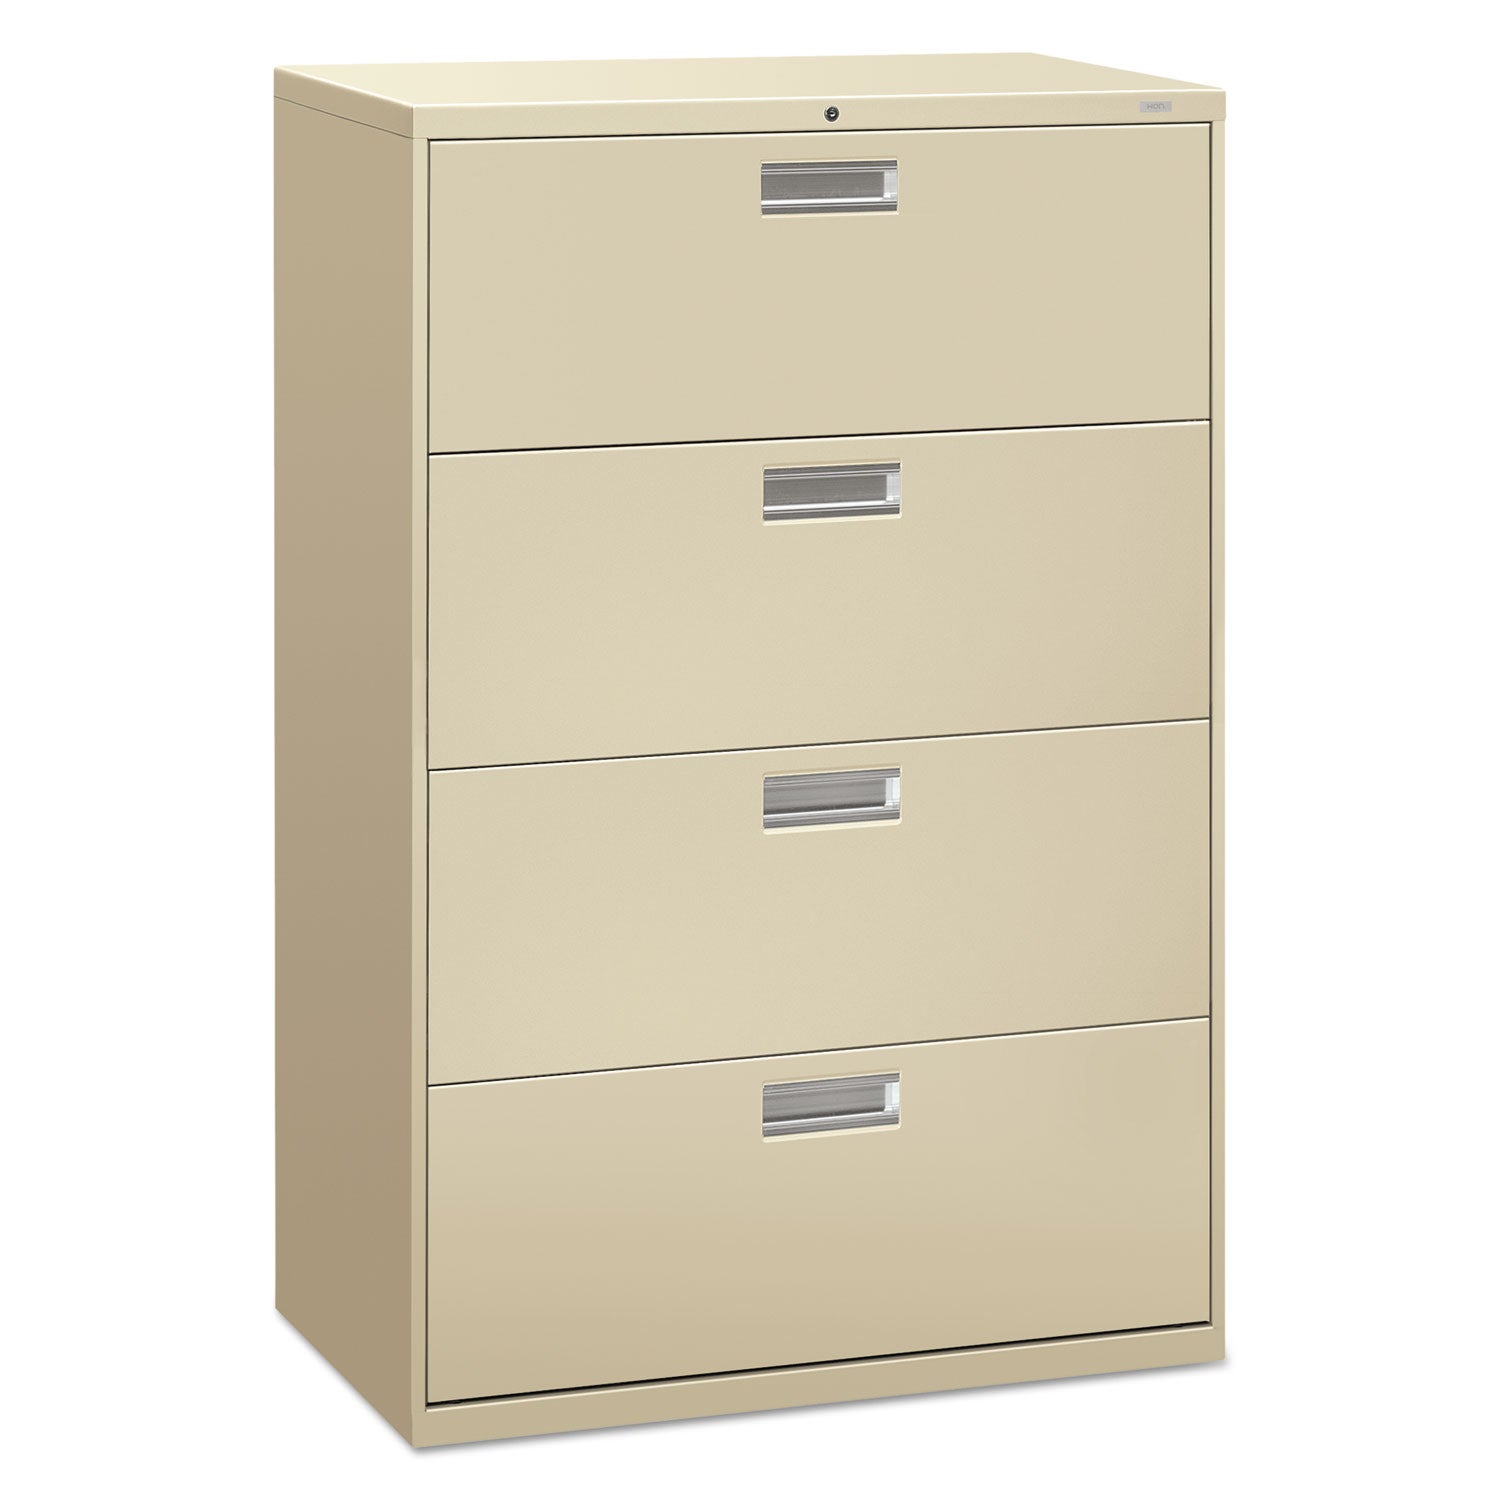 Brigade 600 Series Lateral File, 4 Legal/Letter-Size File Drawers, Putty, 36" x 18" x 52.5 - 